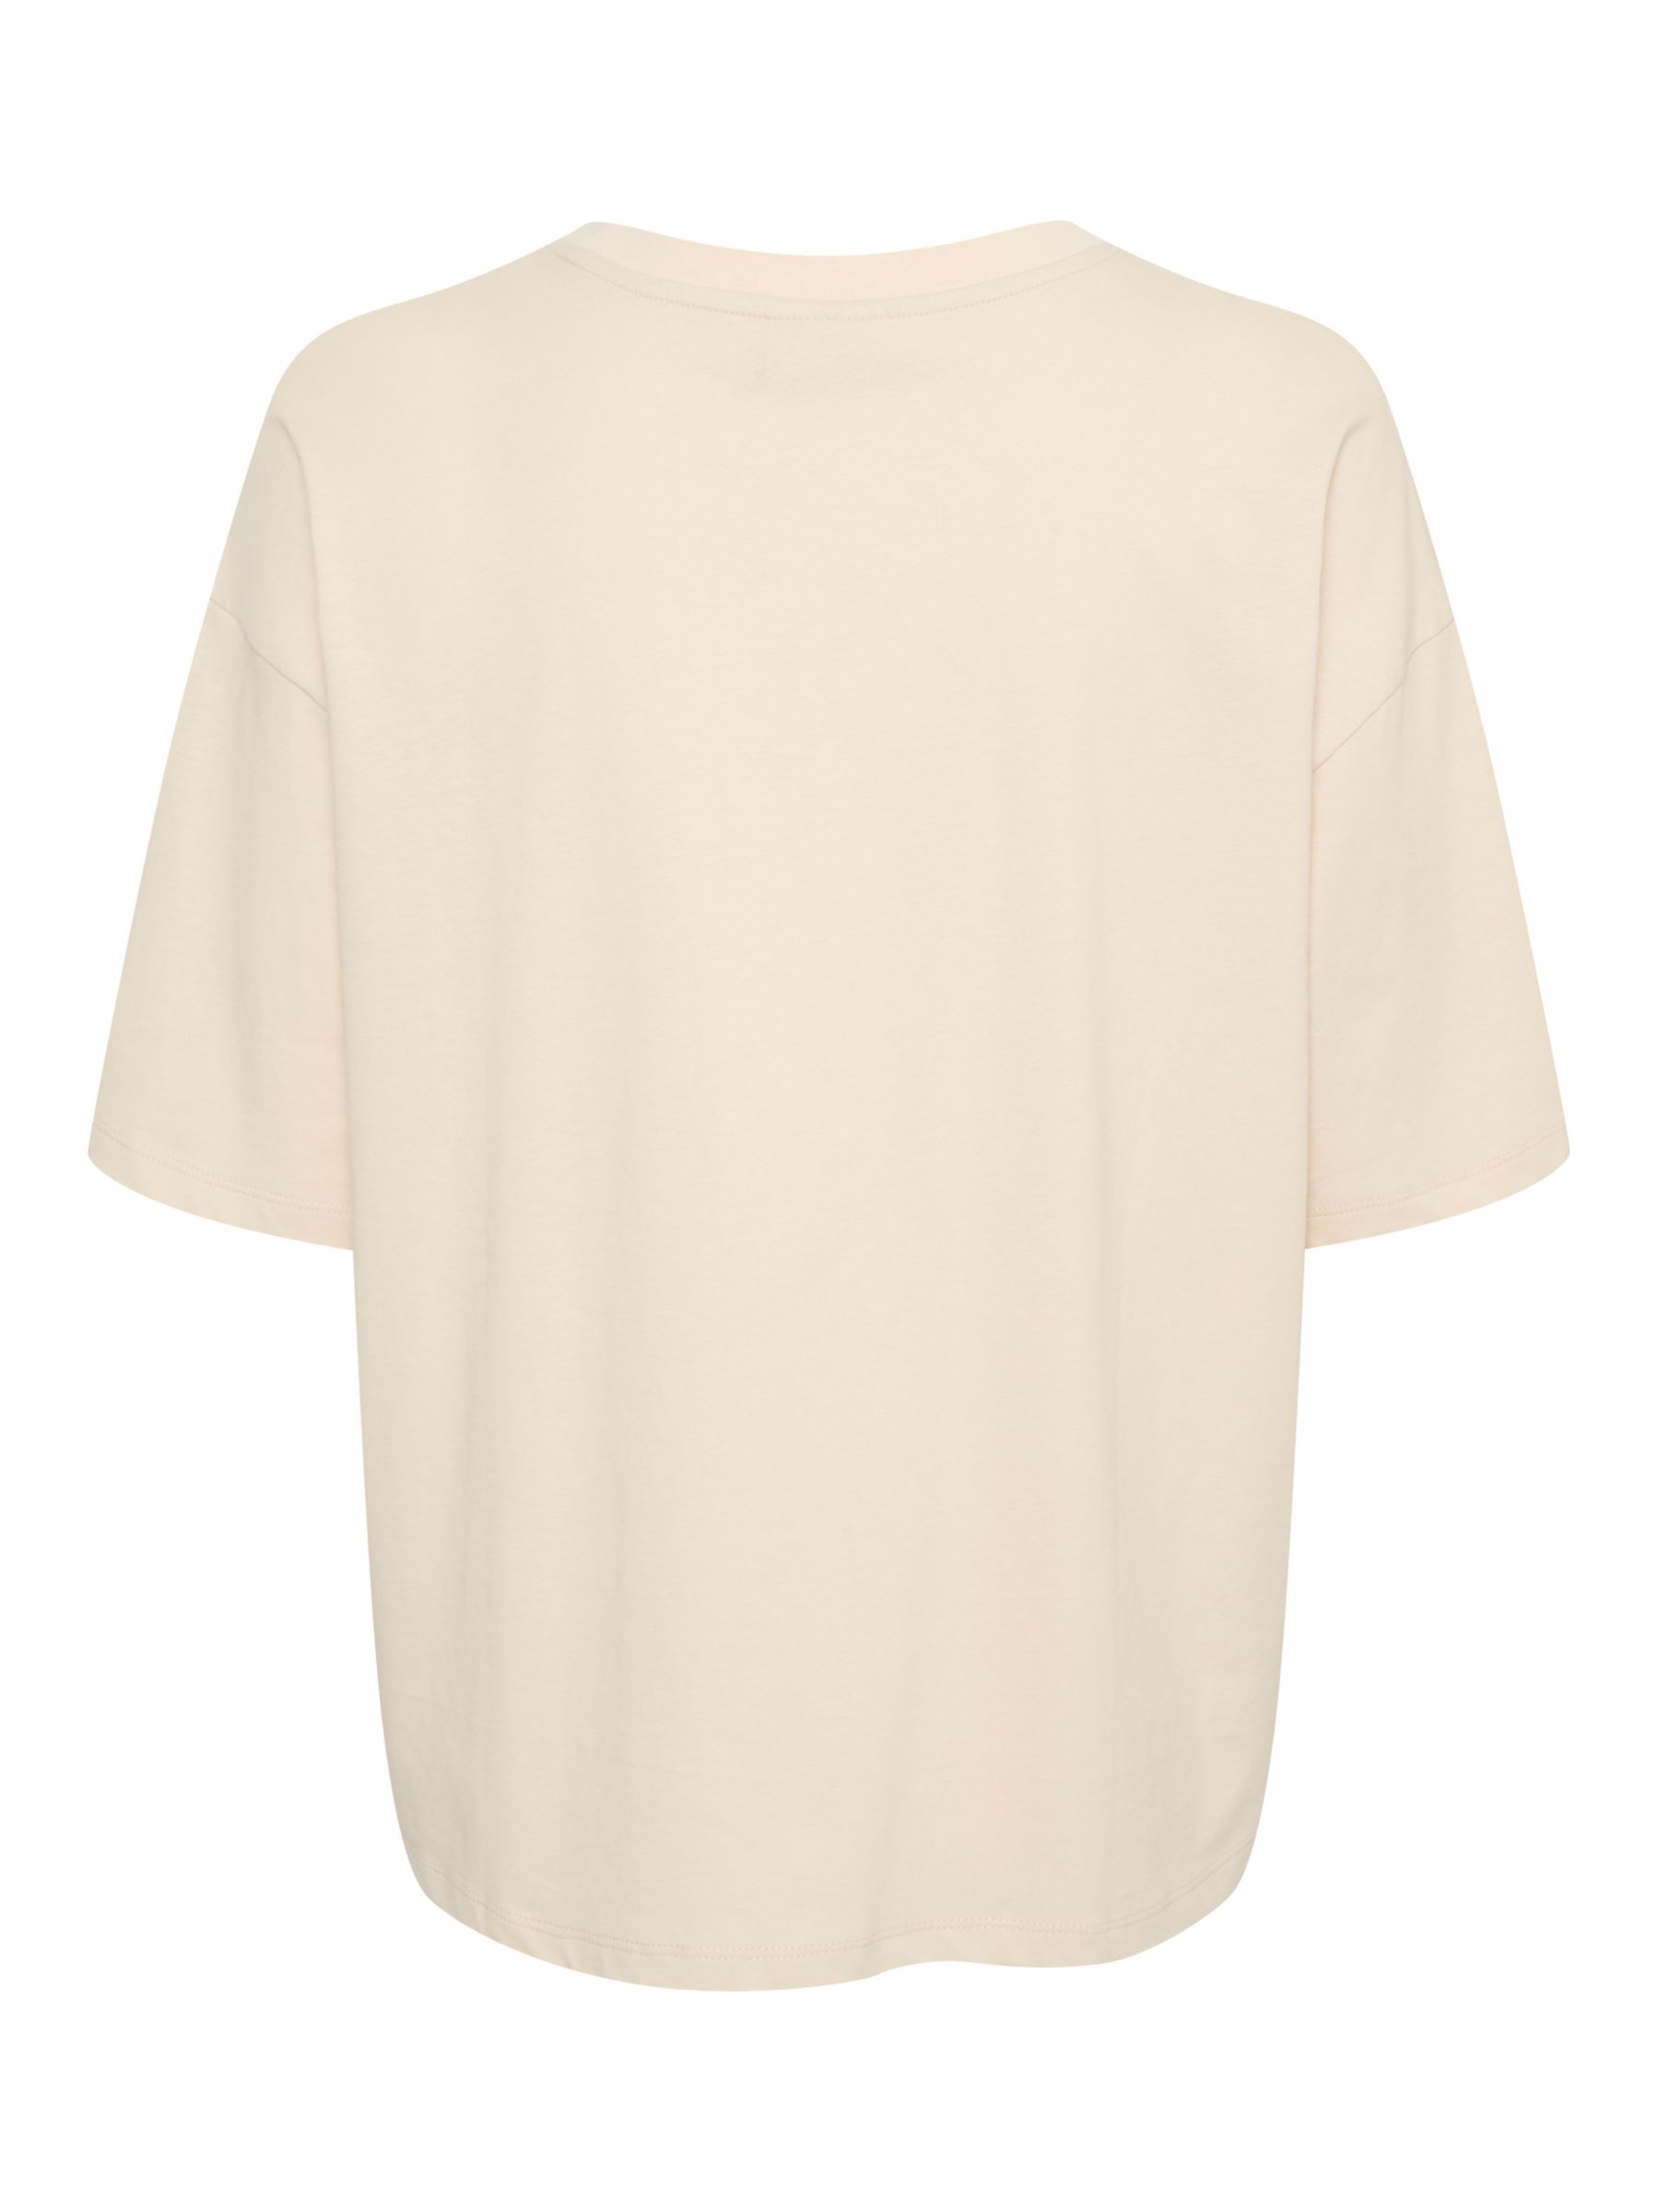 Buy KAFFE Meridith Graphic Oversized T-Shirt, Turtledove Online at johnlewis.com